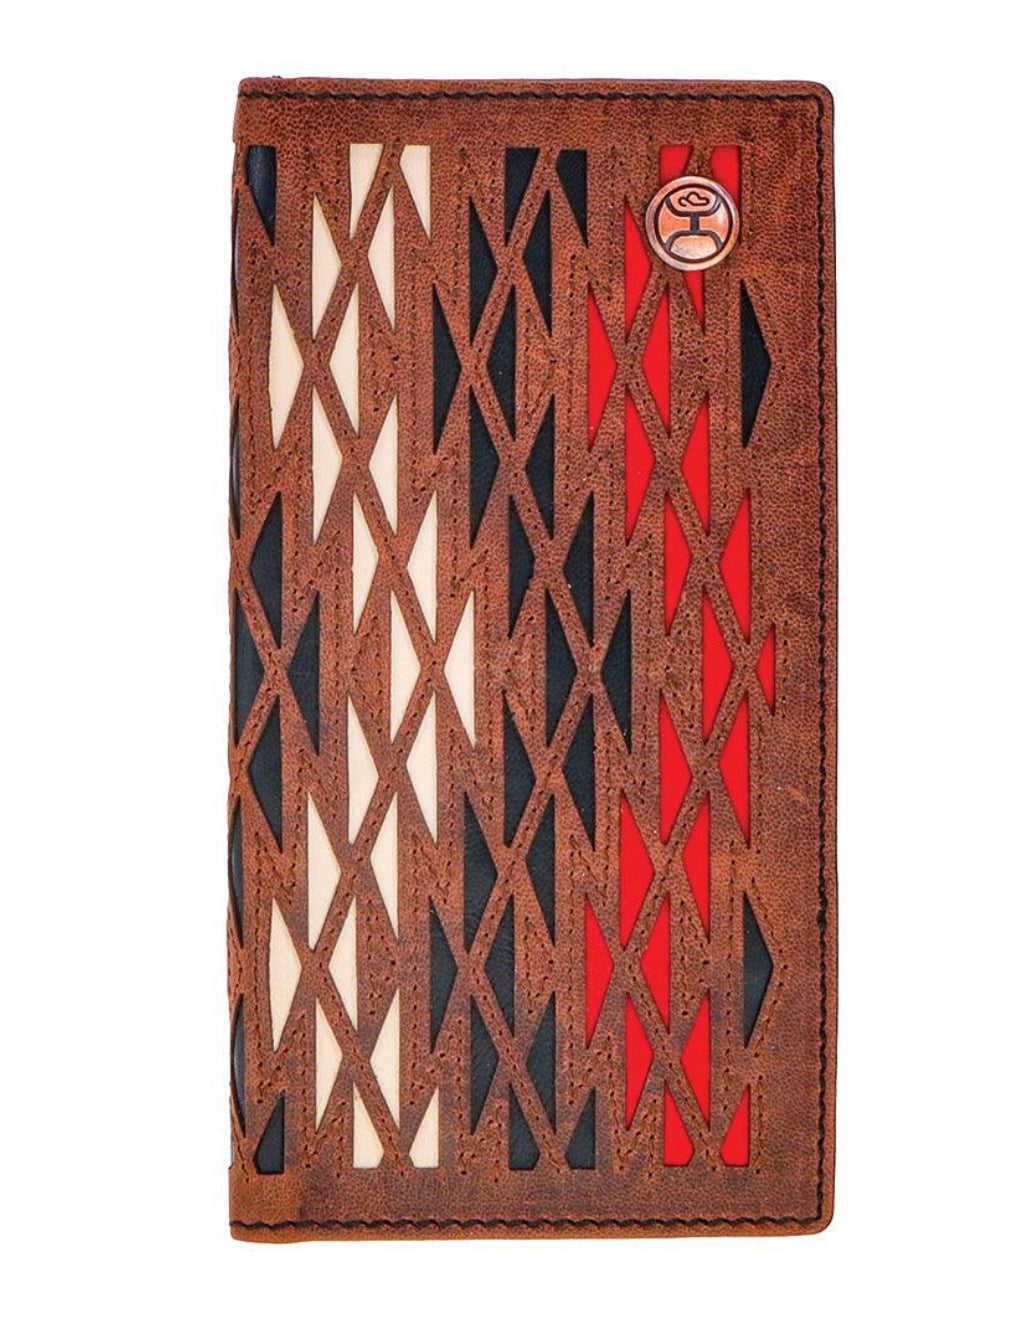 HOOEY “CHAPAWEE” LASER CUT AZTEC PRINT LEATHER RODEO WALLET WITH BLACK/RED/IVORY INLAY AND HOOEY LOGO RIVET